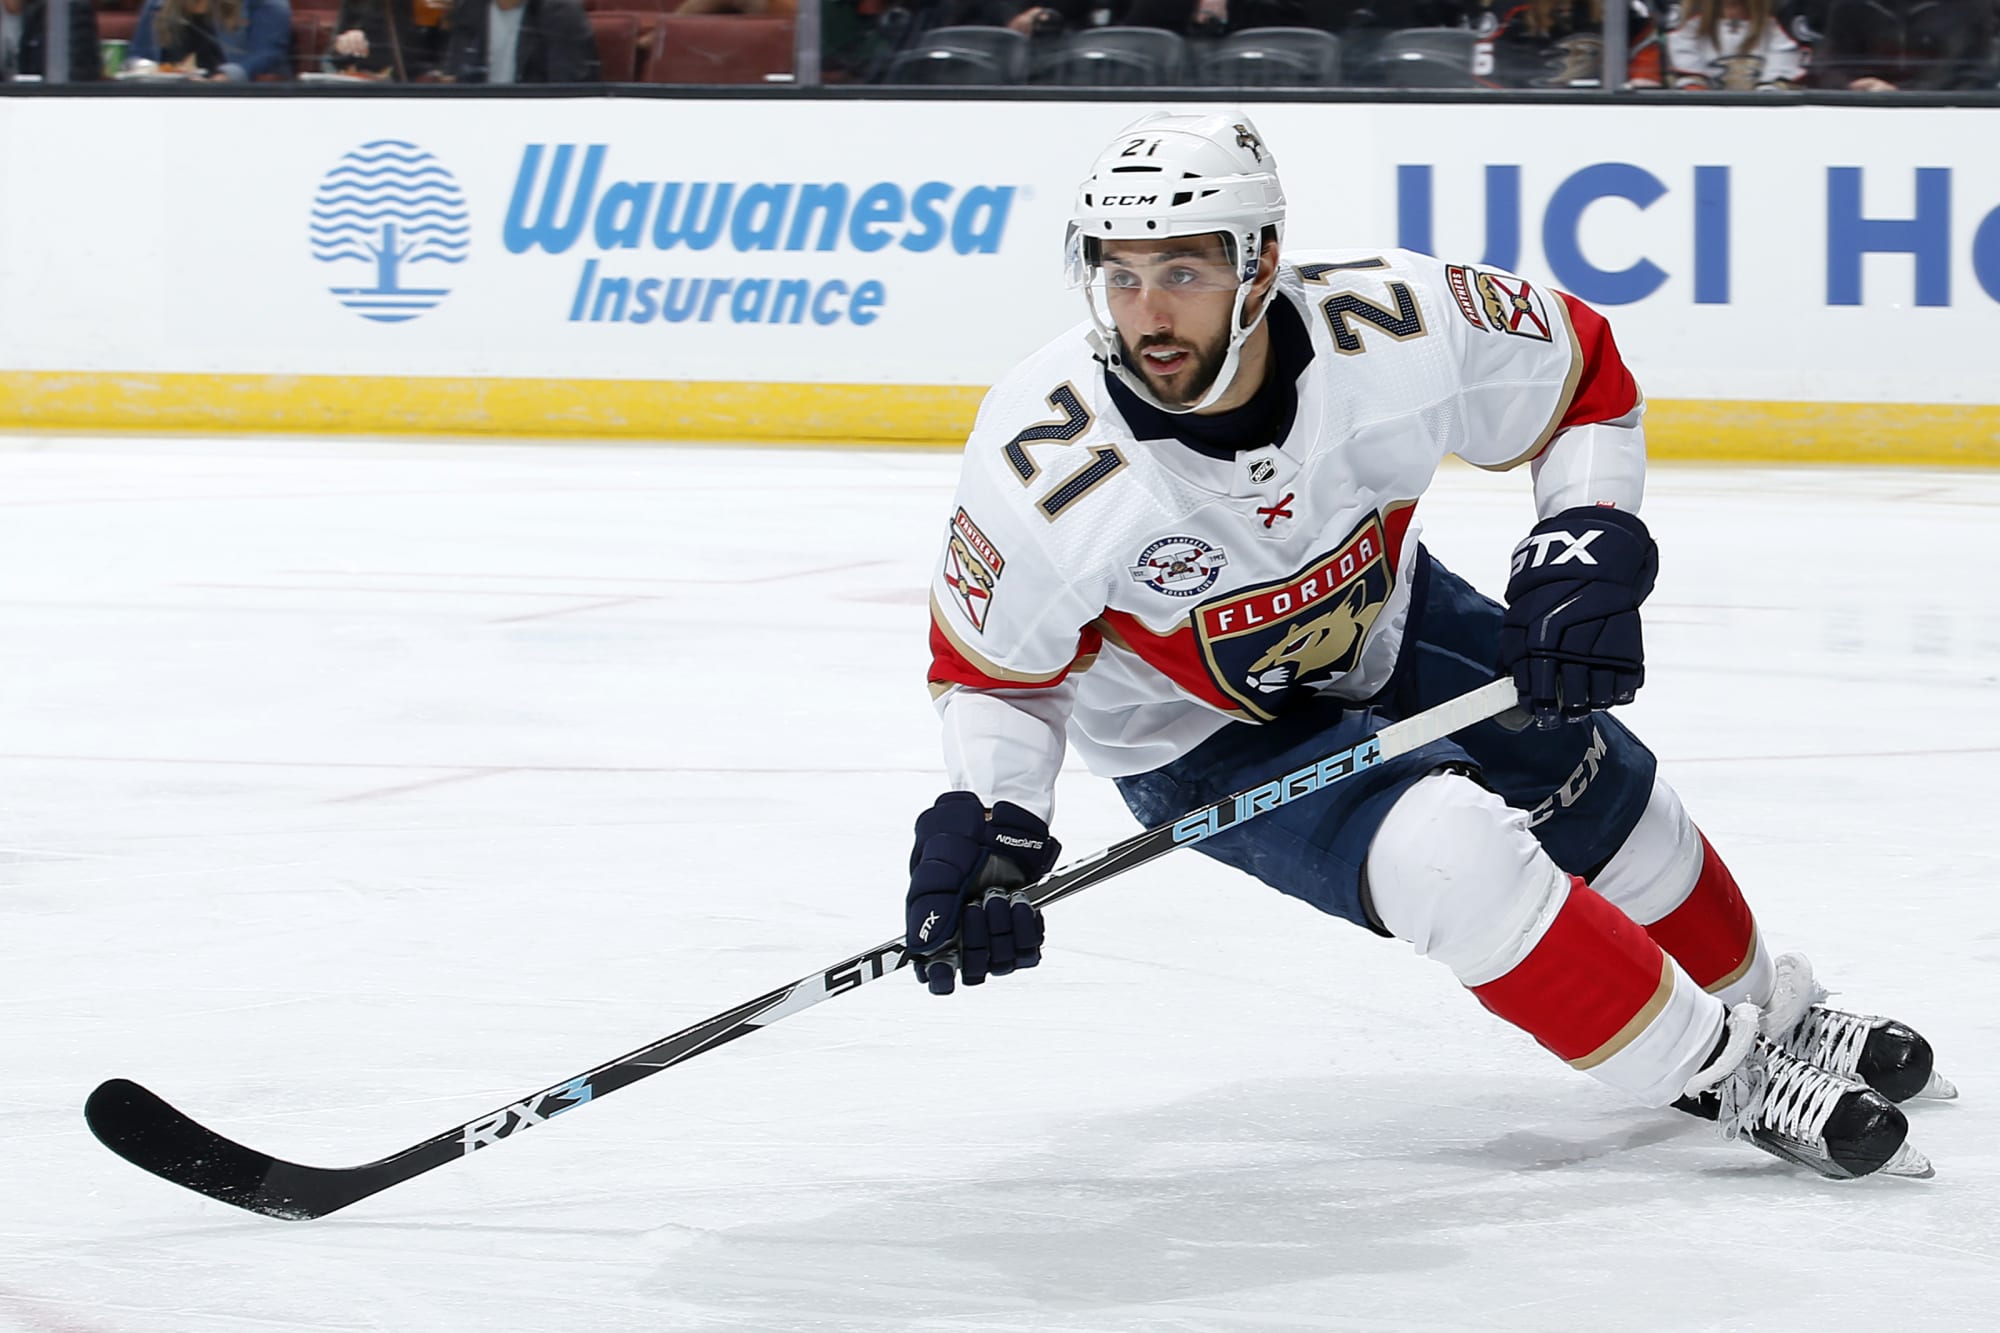 Florida Panthers: 2019 Was a Rough Season for Vincent Trocheck